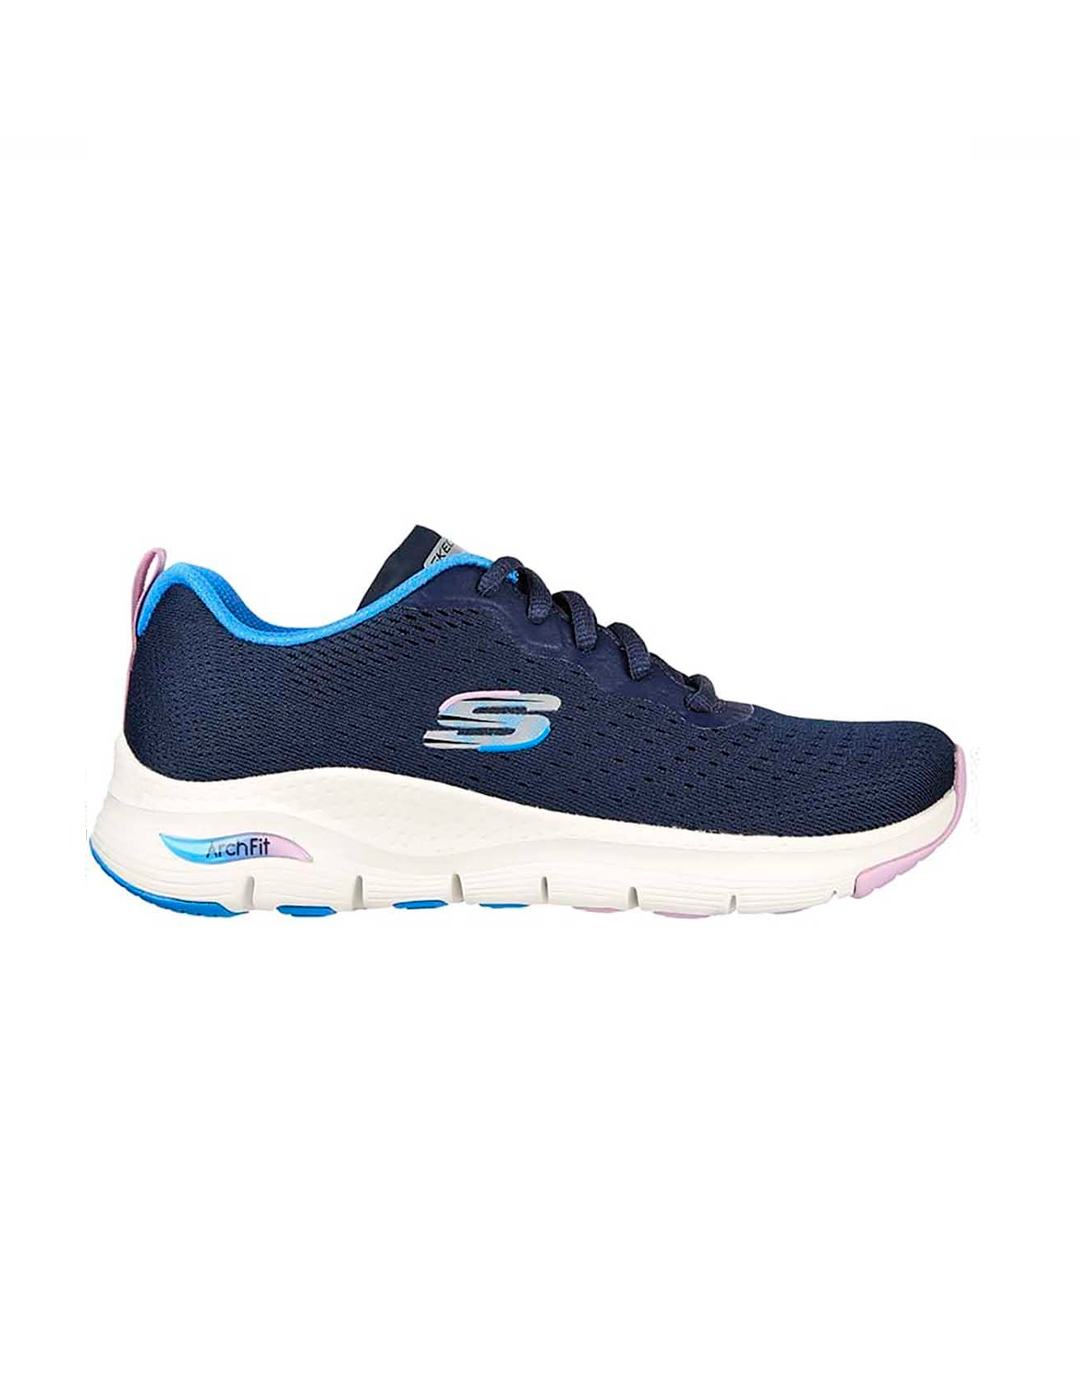 1664531452007 426 zapatillas skechers arch fit intinity cool nvy ml